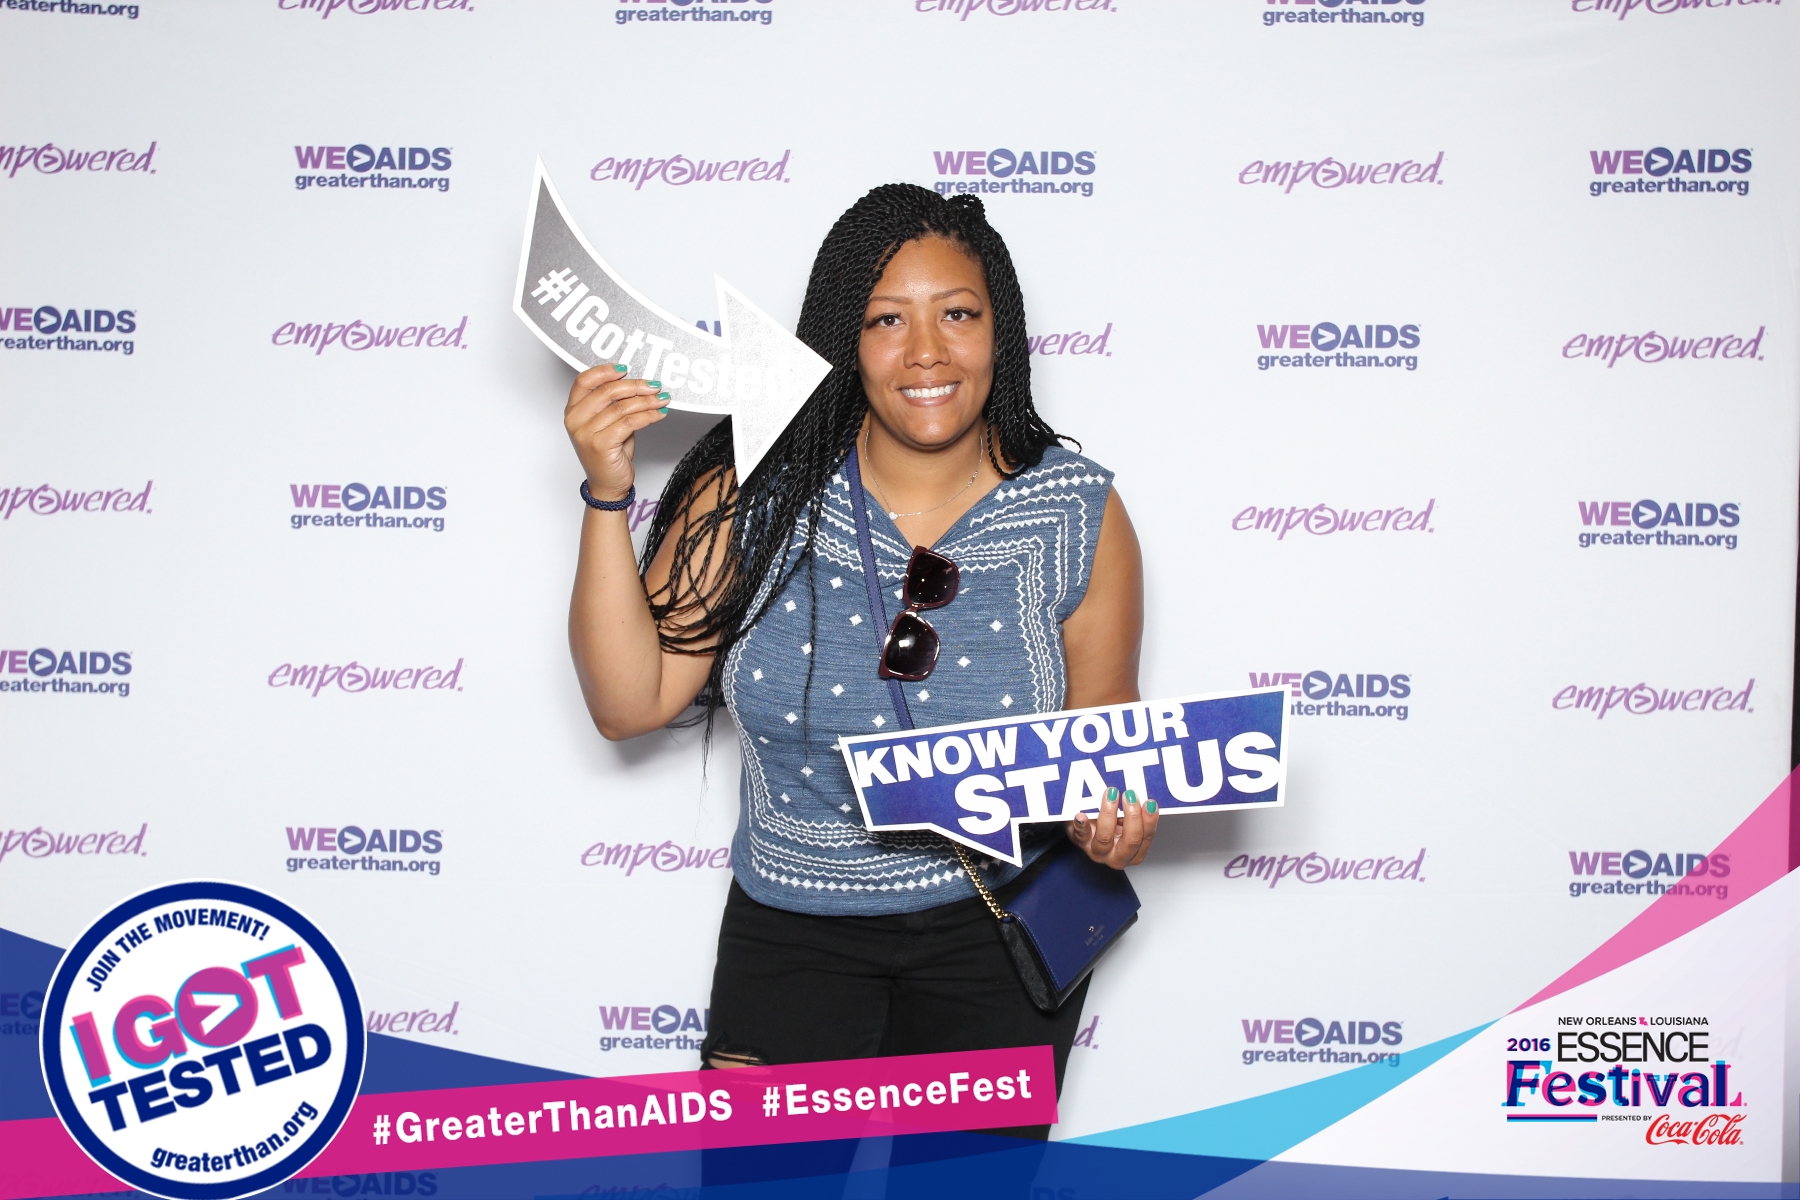 Photo booth at 2016 ESSENCE Festival in New Orleans